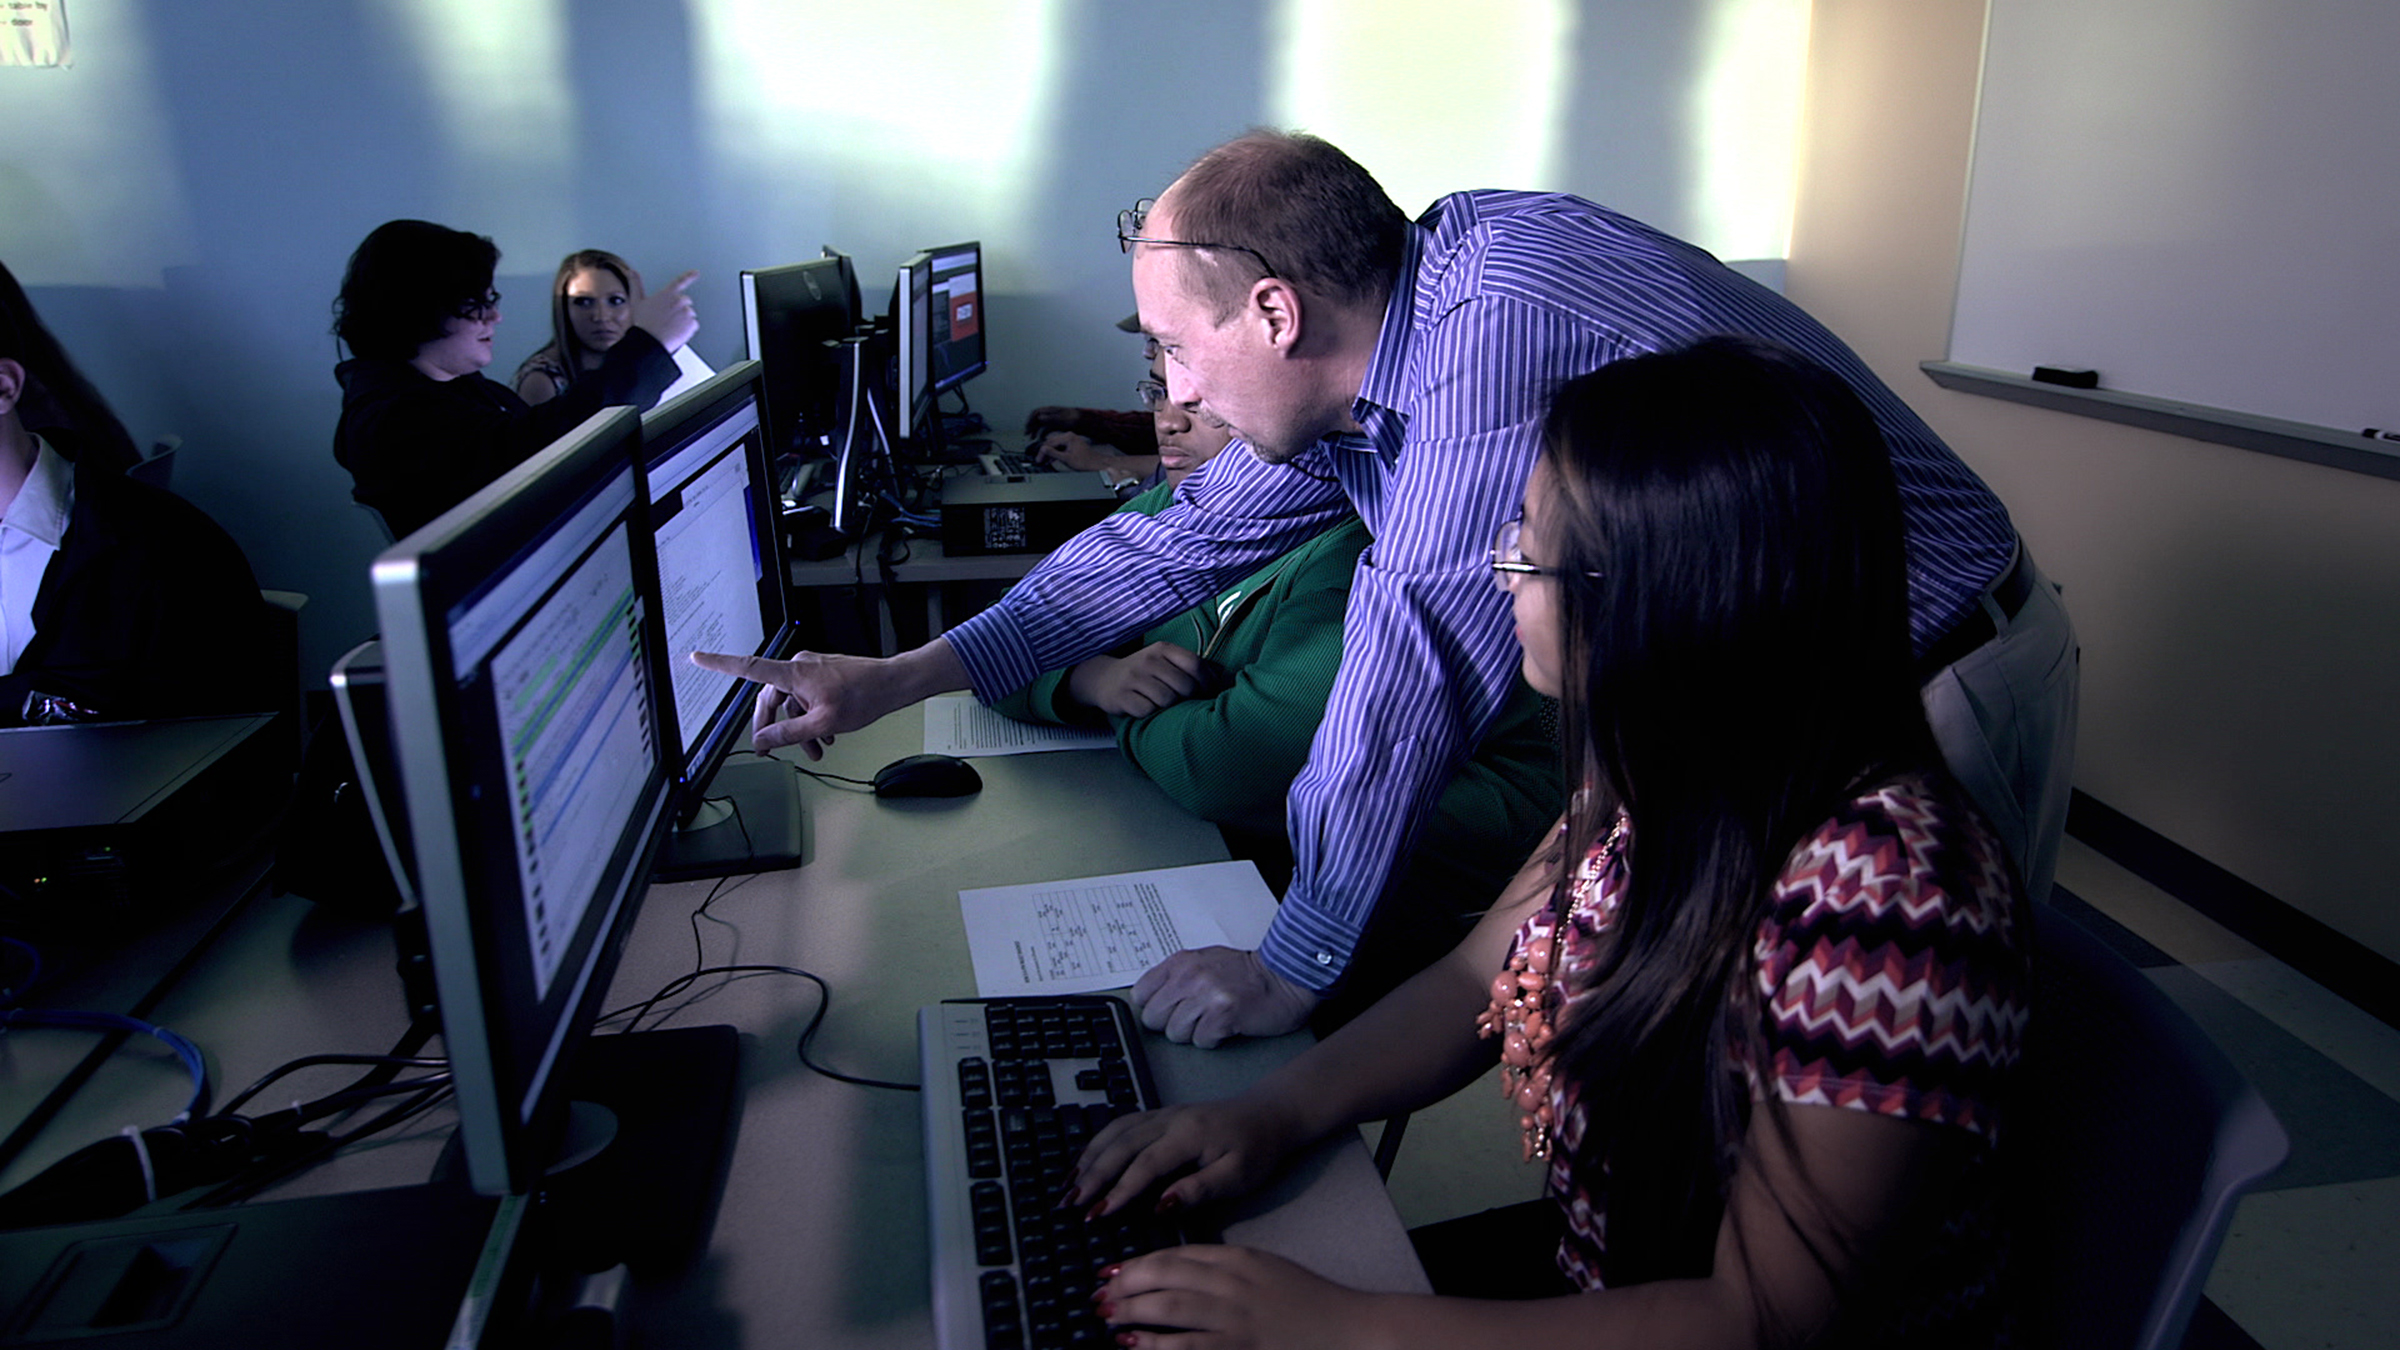 Dr. Reichherzer and his students experiment with network attacks and defense methods in a secure and controlled environment. 